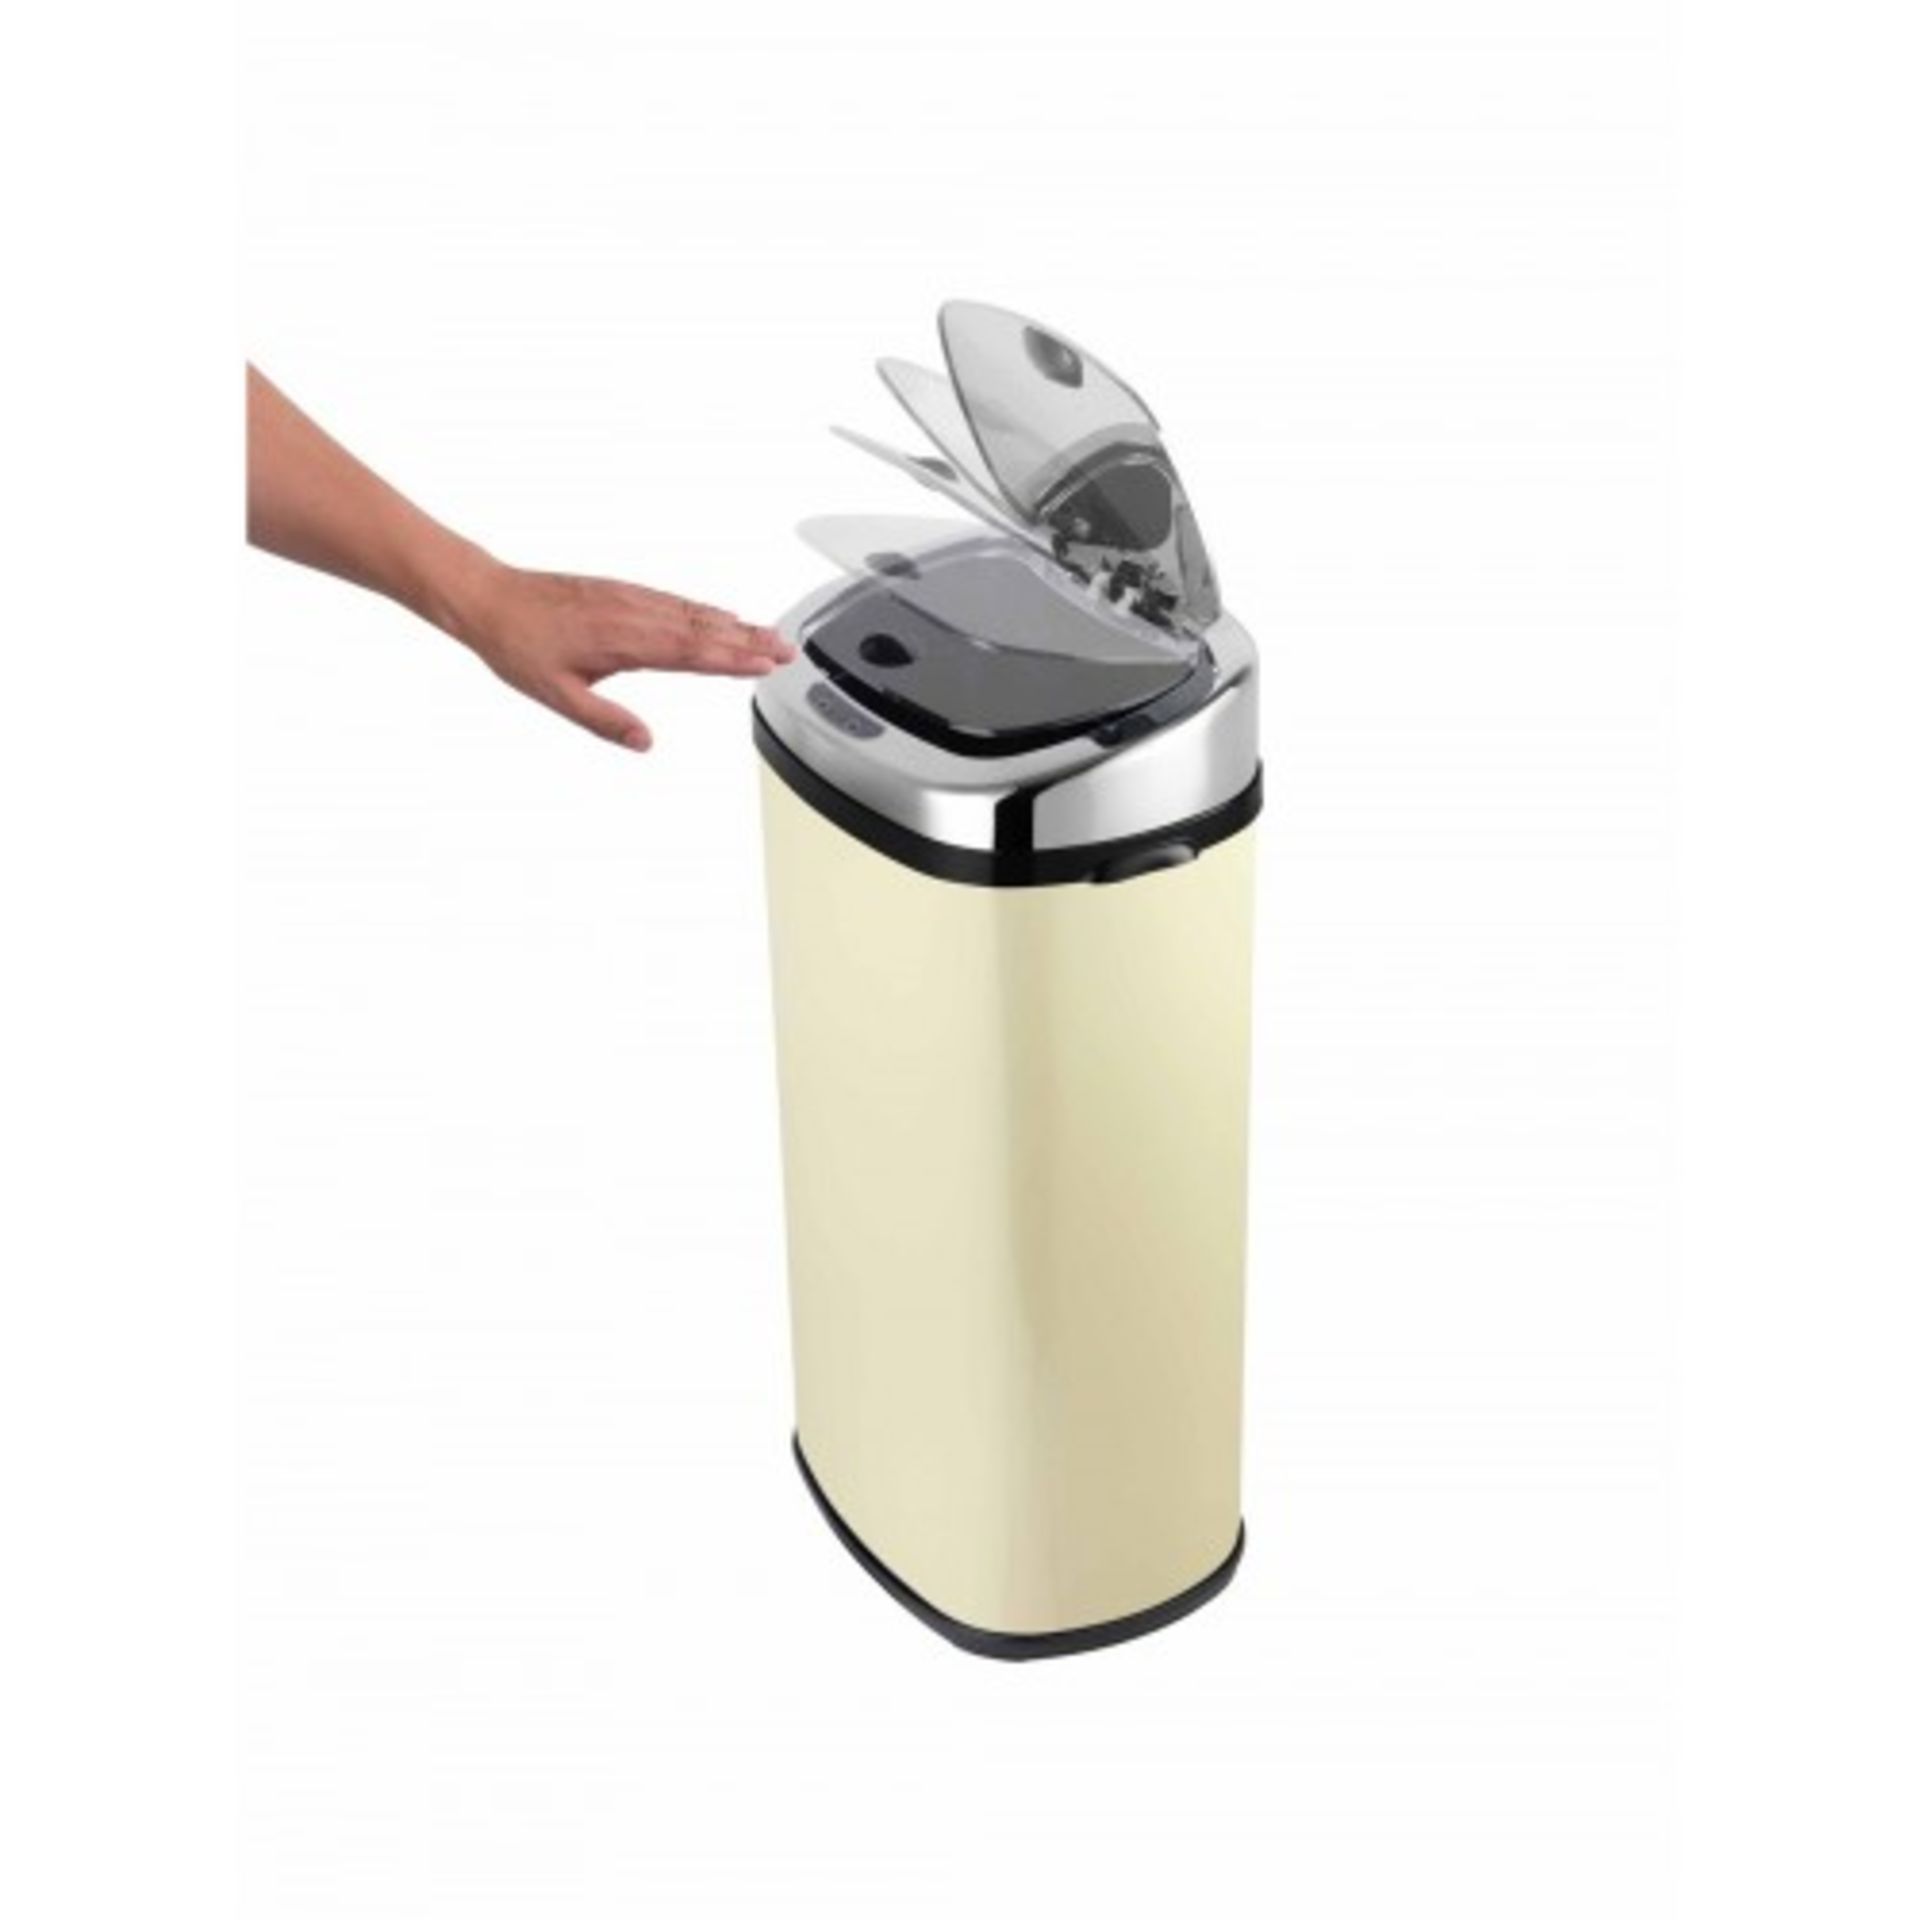 Brand New complete with full Warranty 


Morphy Richards 42L Square Sensor Bin Cream - Image 2 of 2